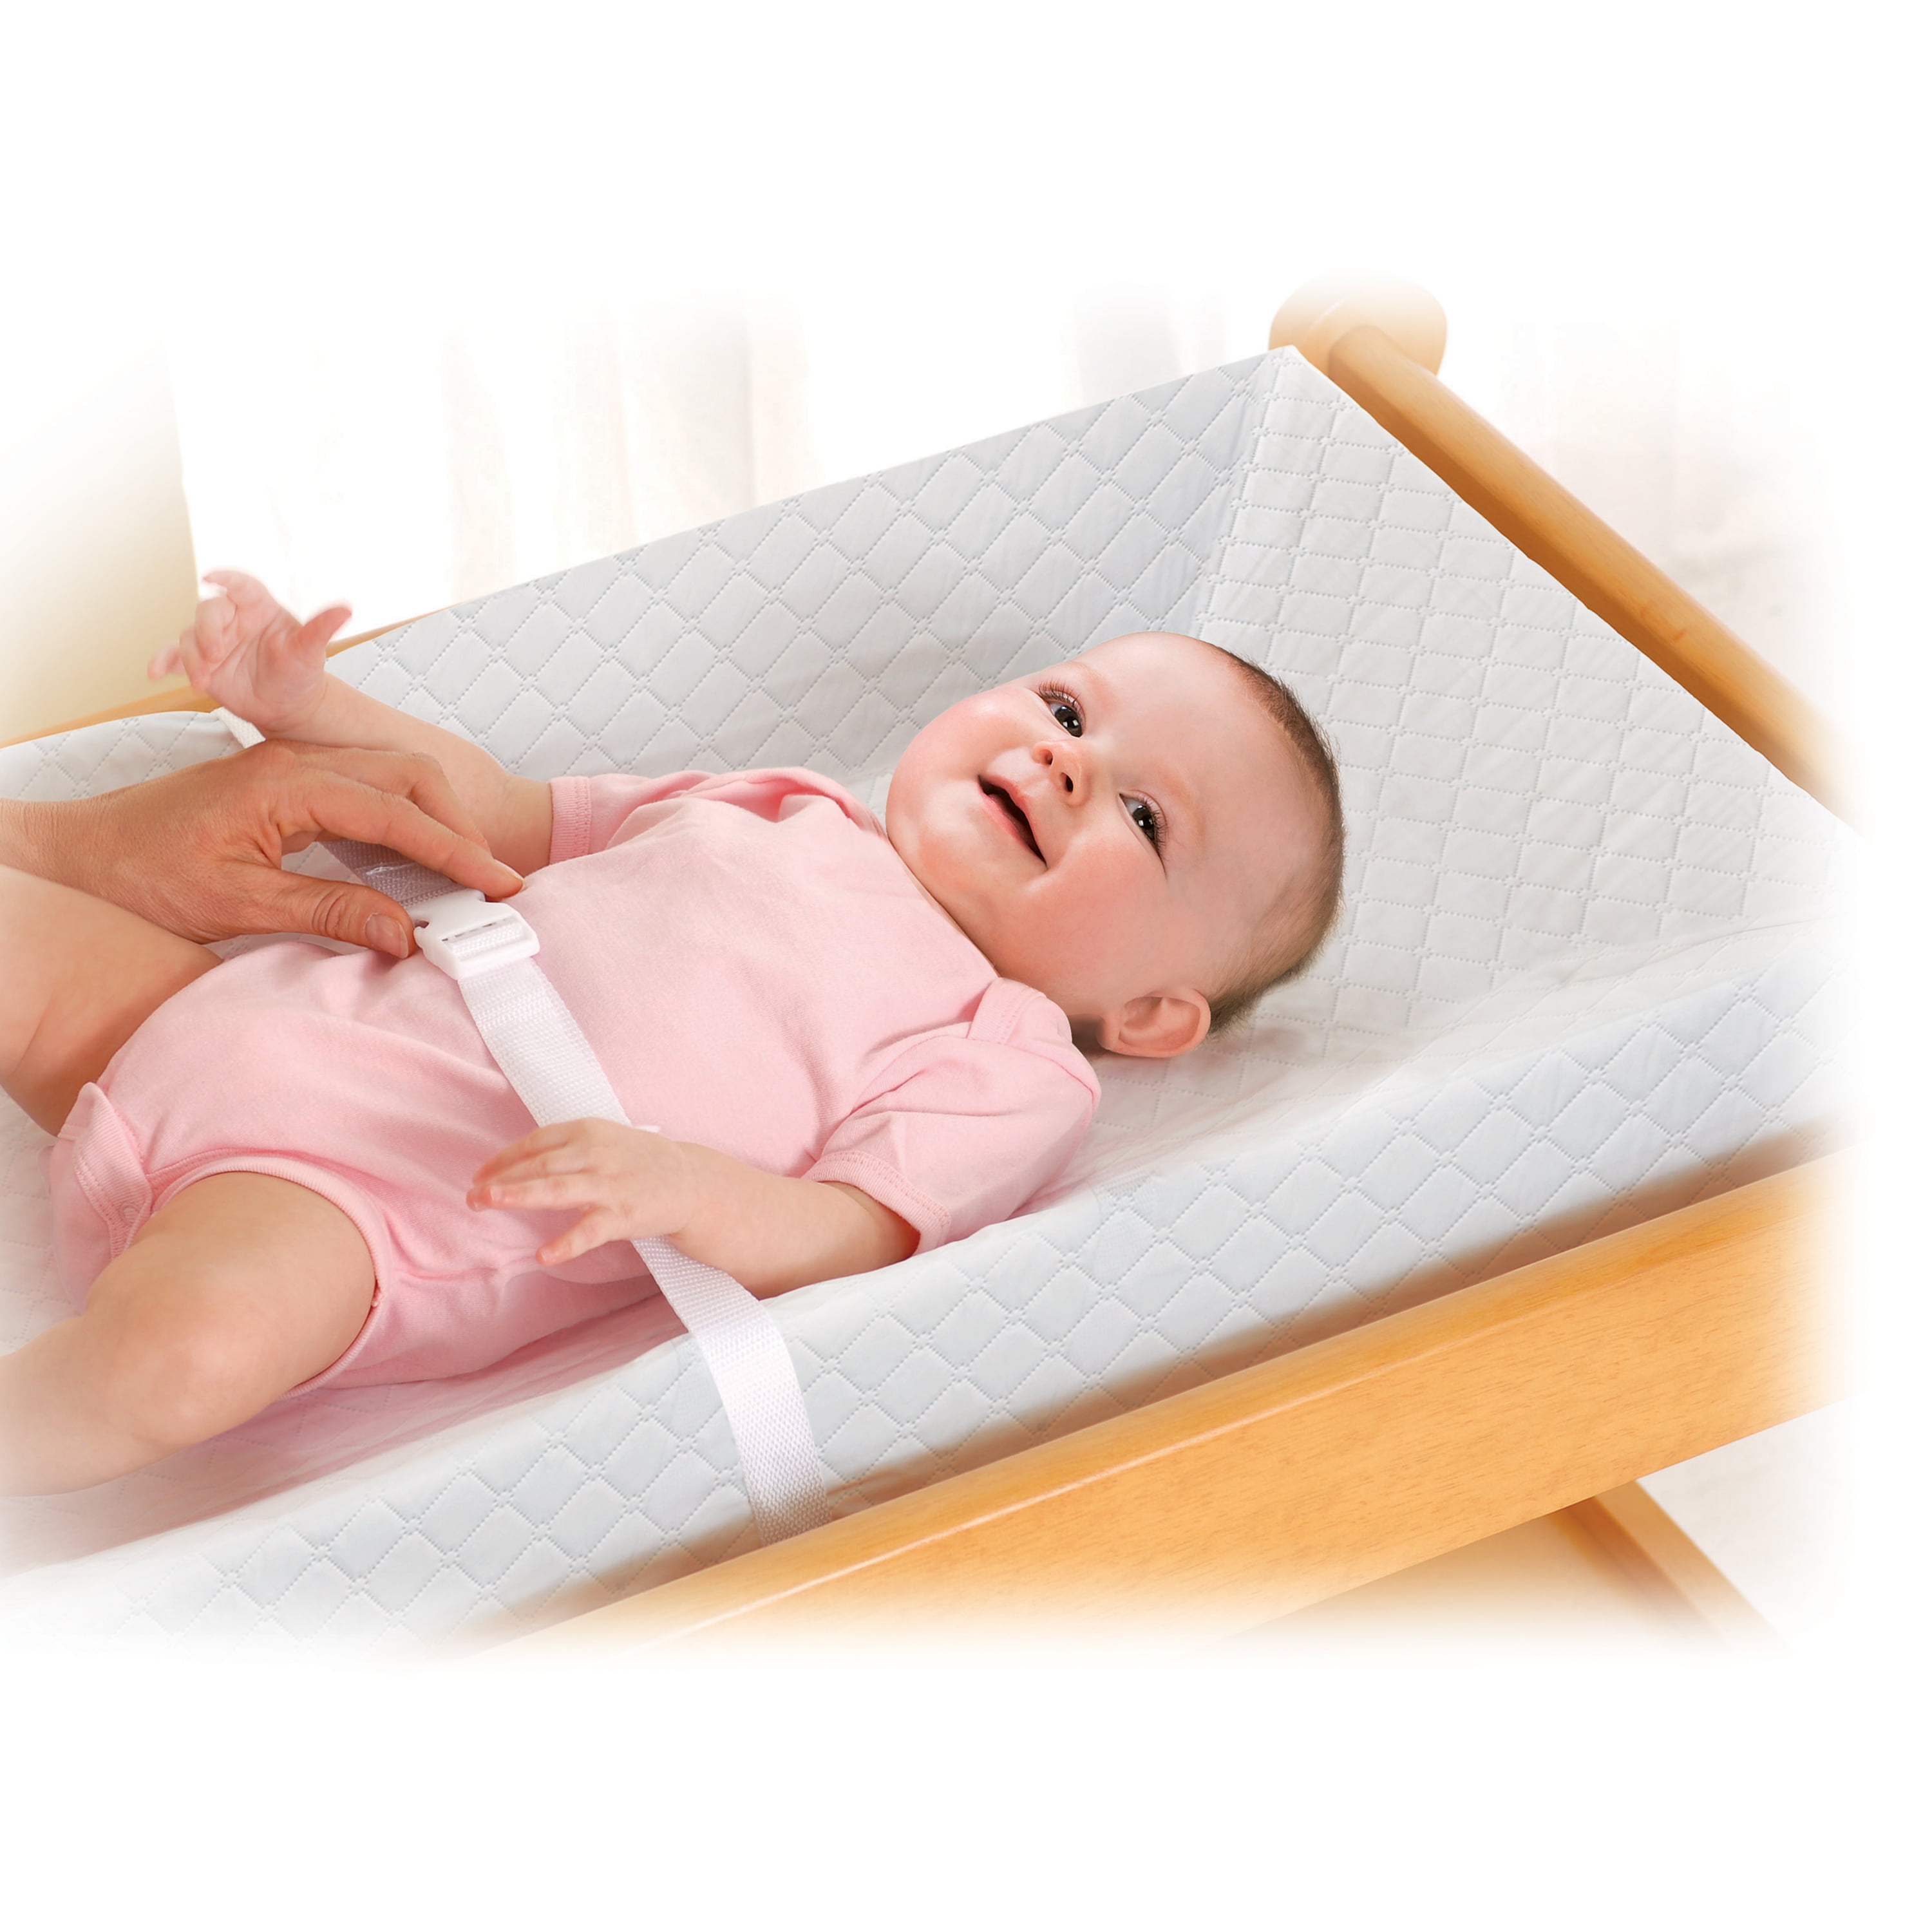 SUMMER INFANT 92000A CONTOURED CHANGING PAD 2 SIDED 